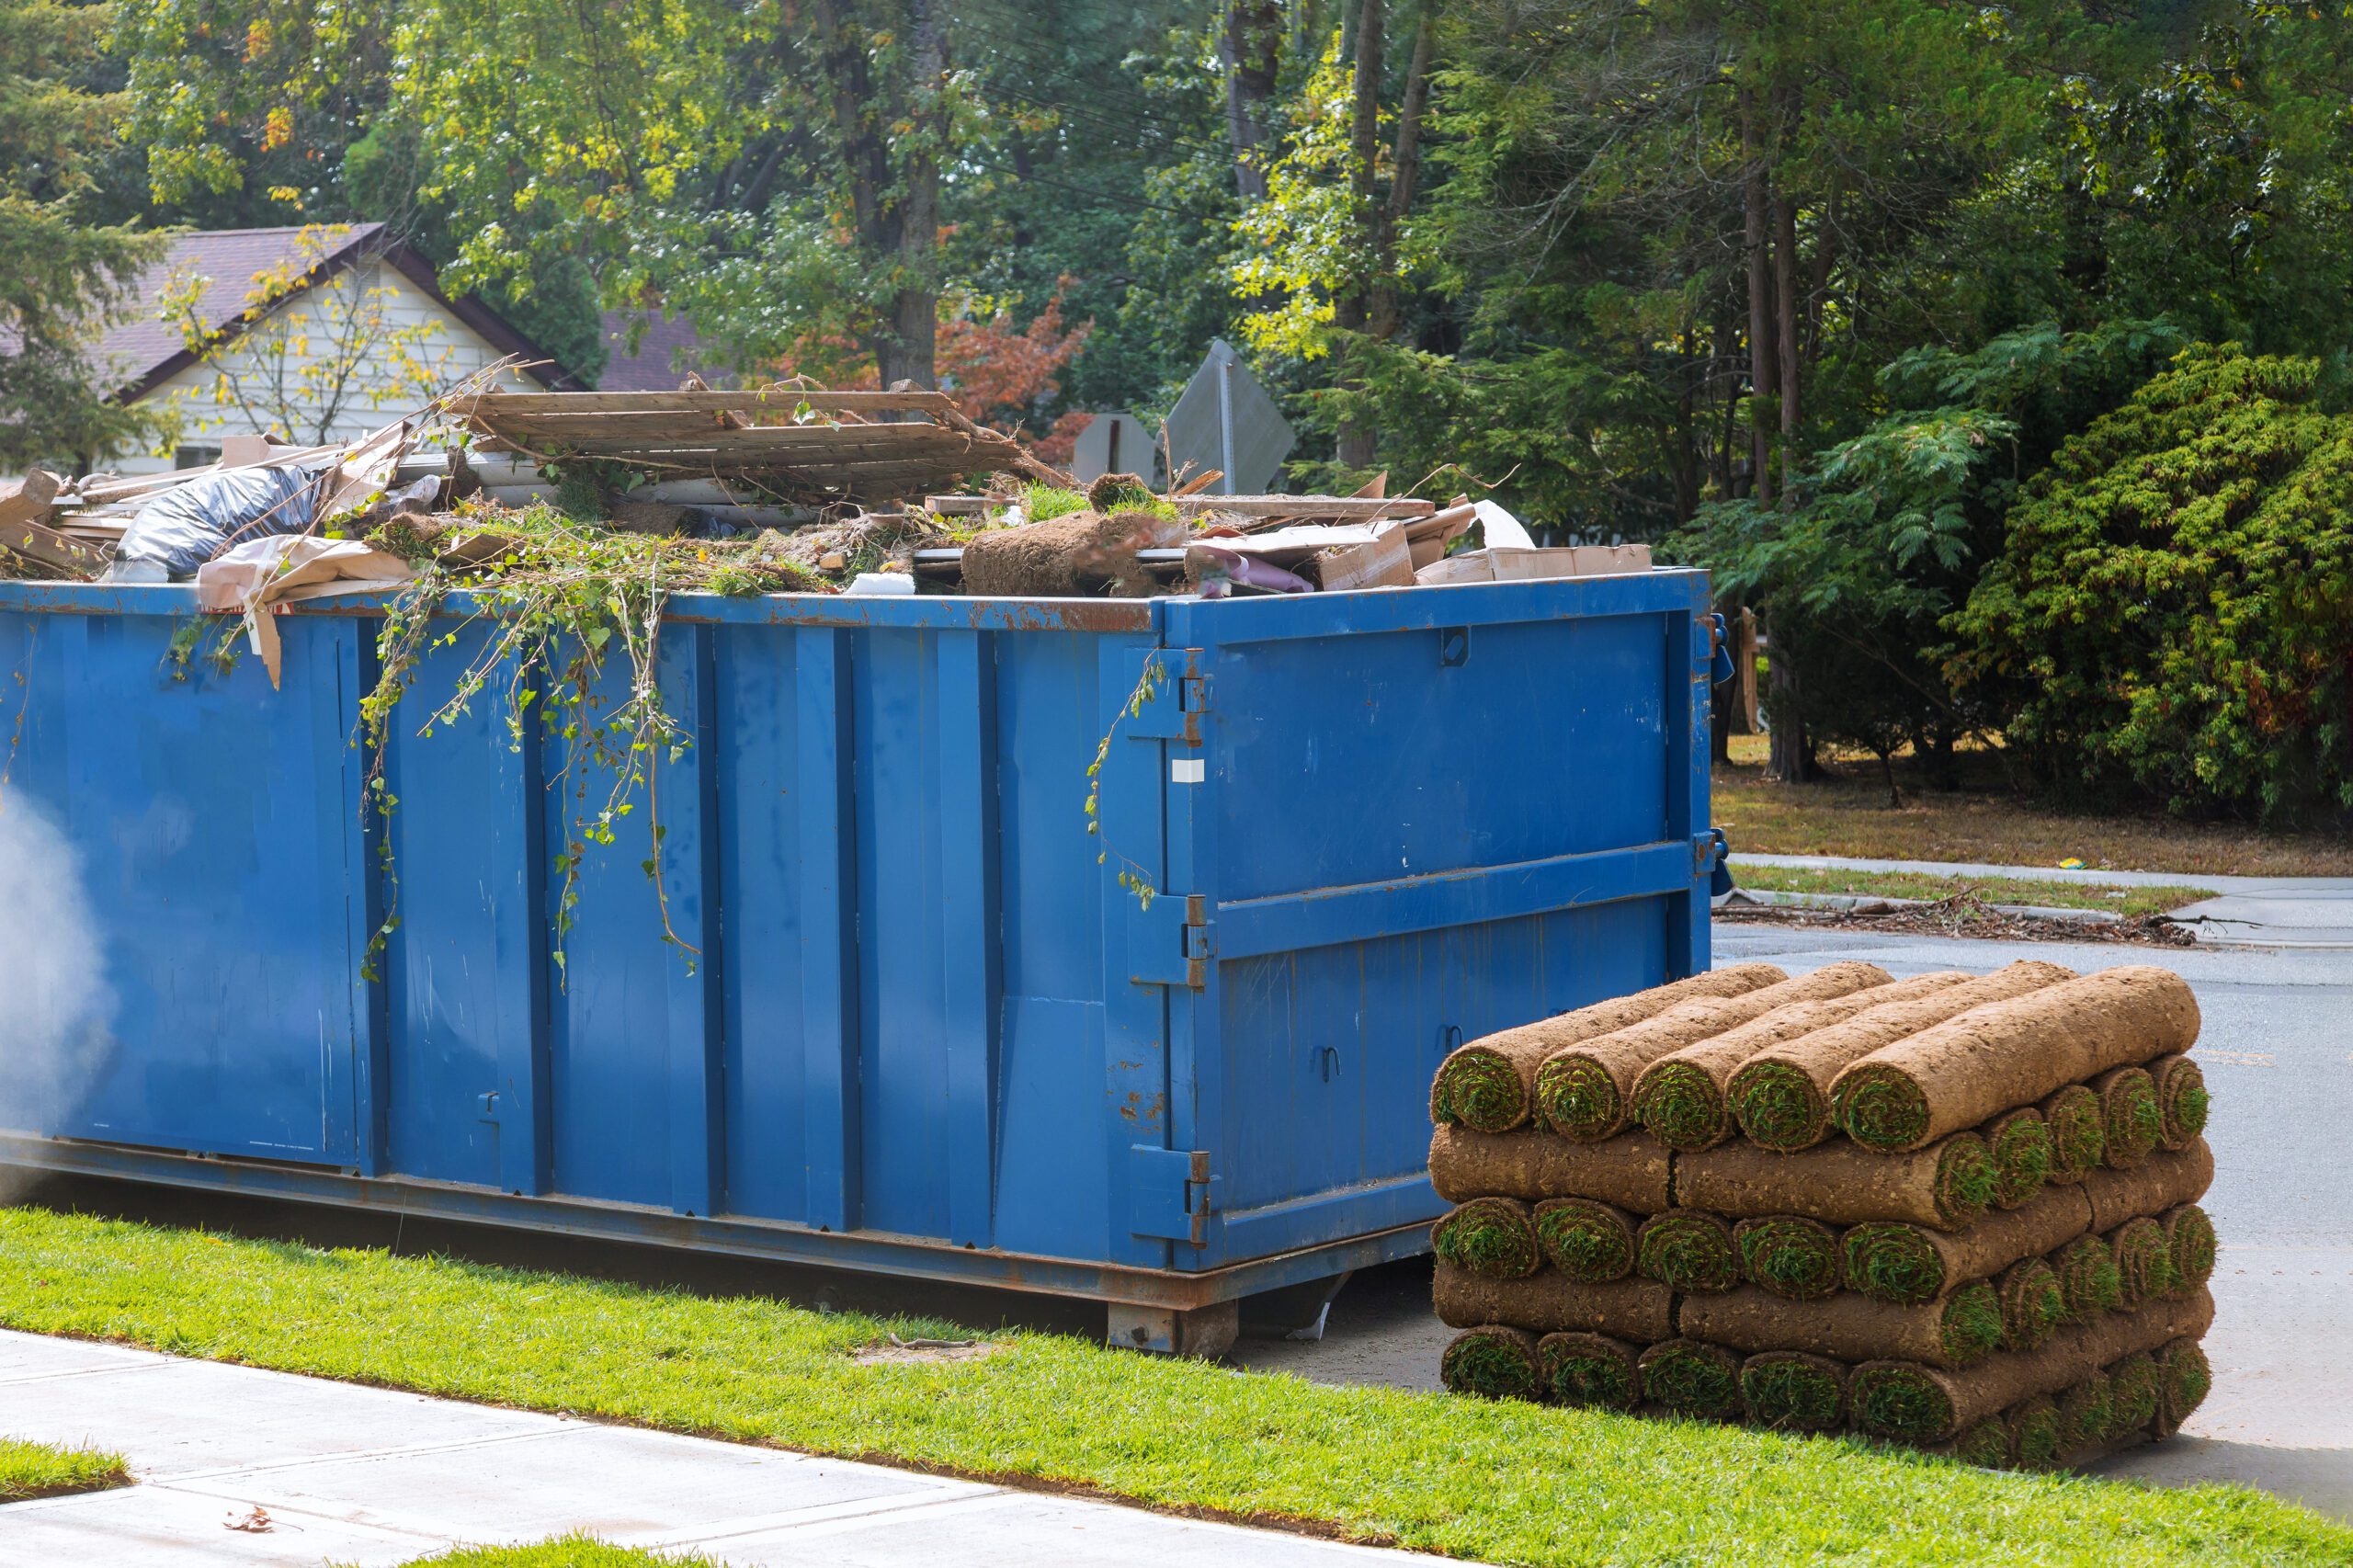 Hutchinson Dumpster Rental Roll off dumpster with lawn grass pallets sod and landscaping debris